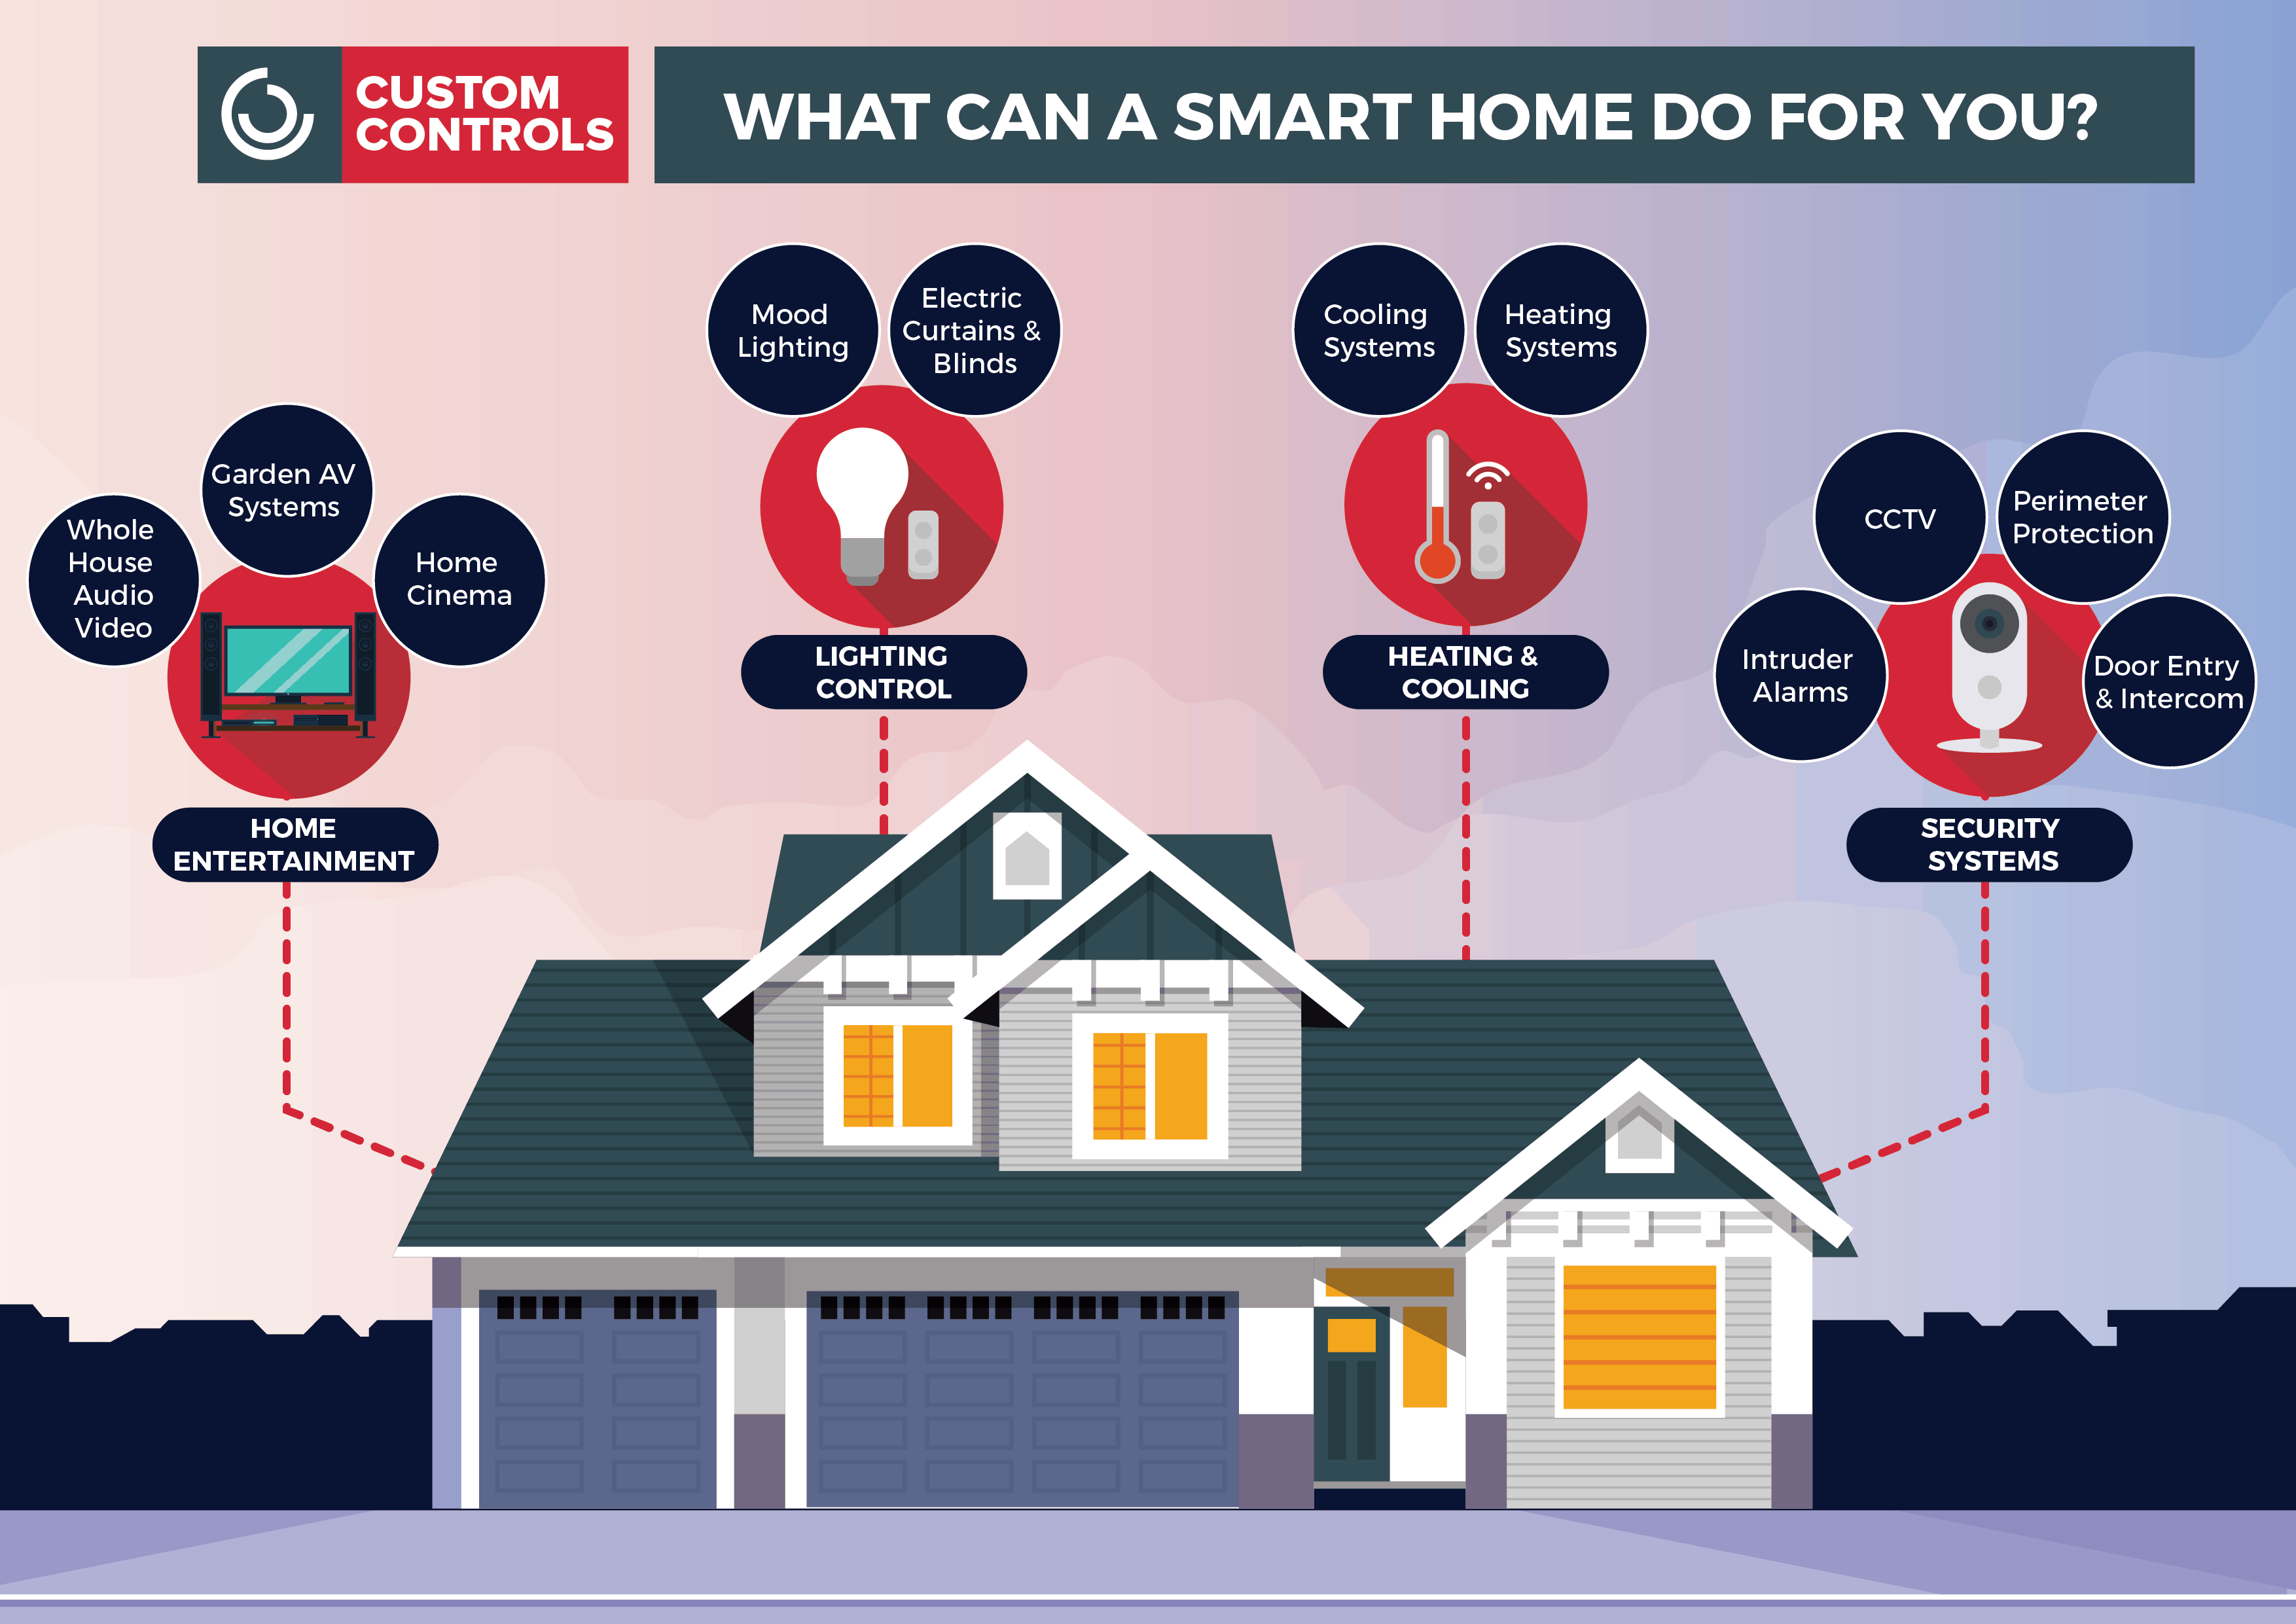 Smart Home Infographic by www.CustomControls.co.uk